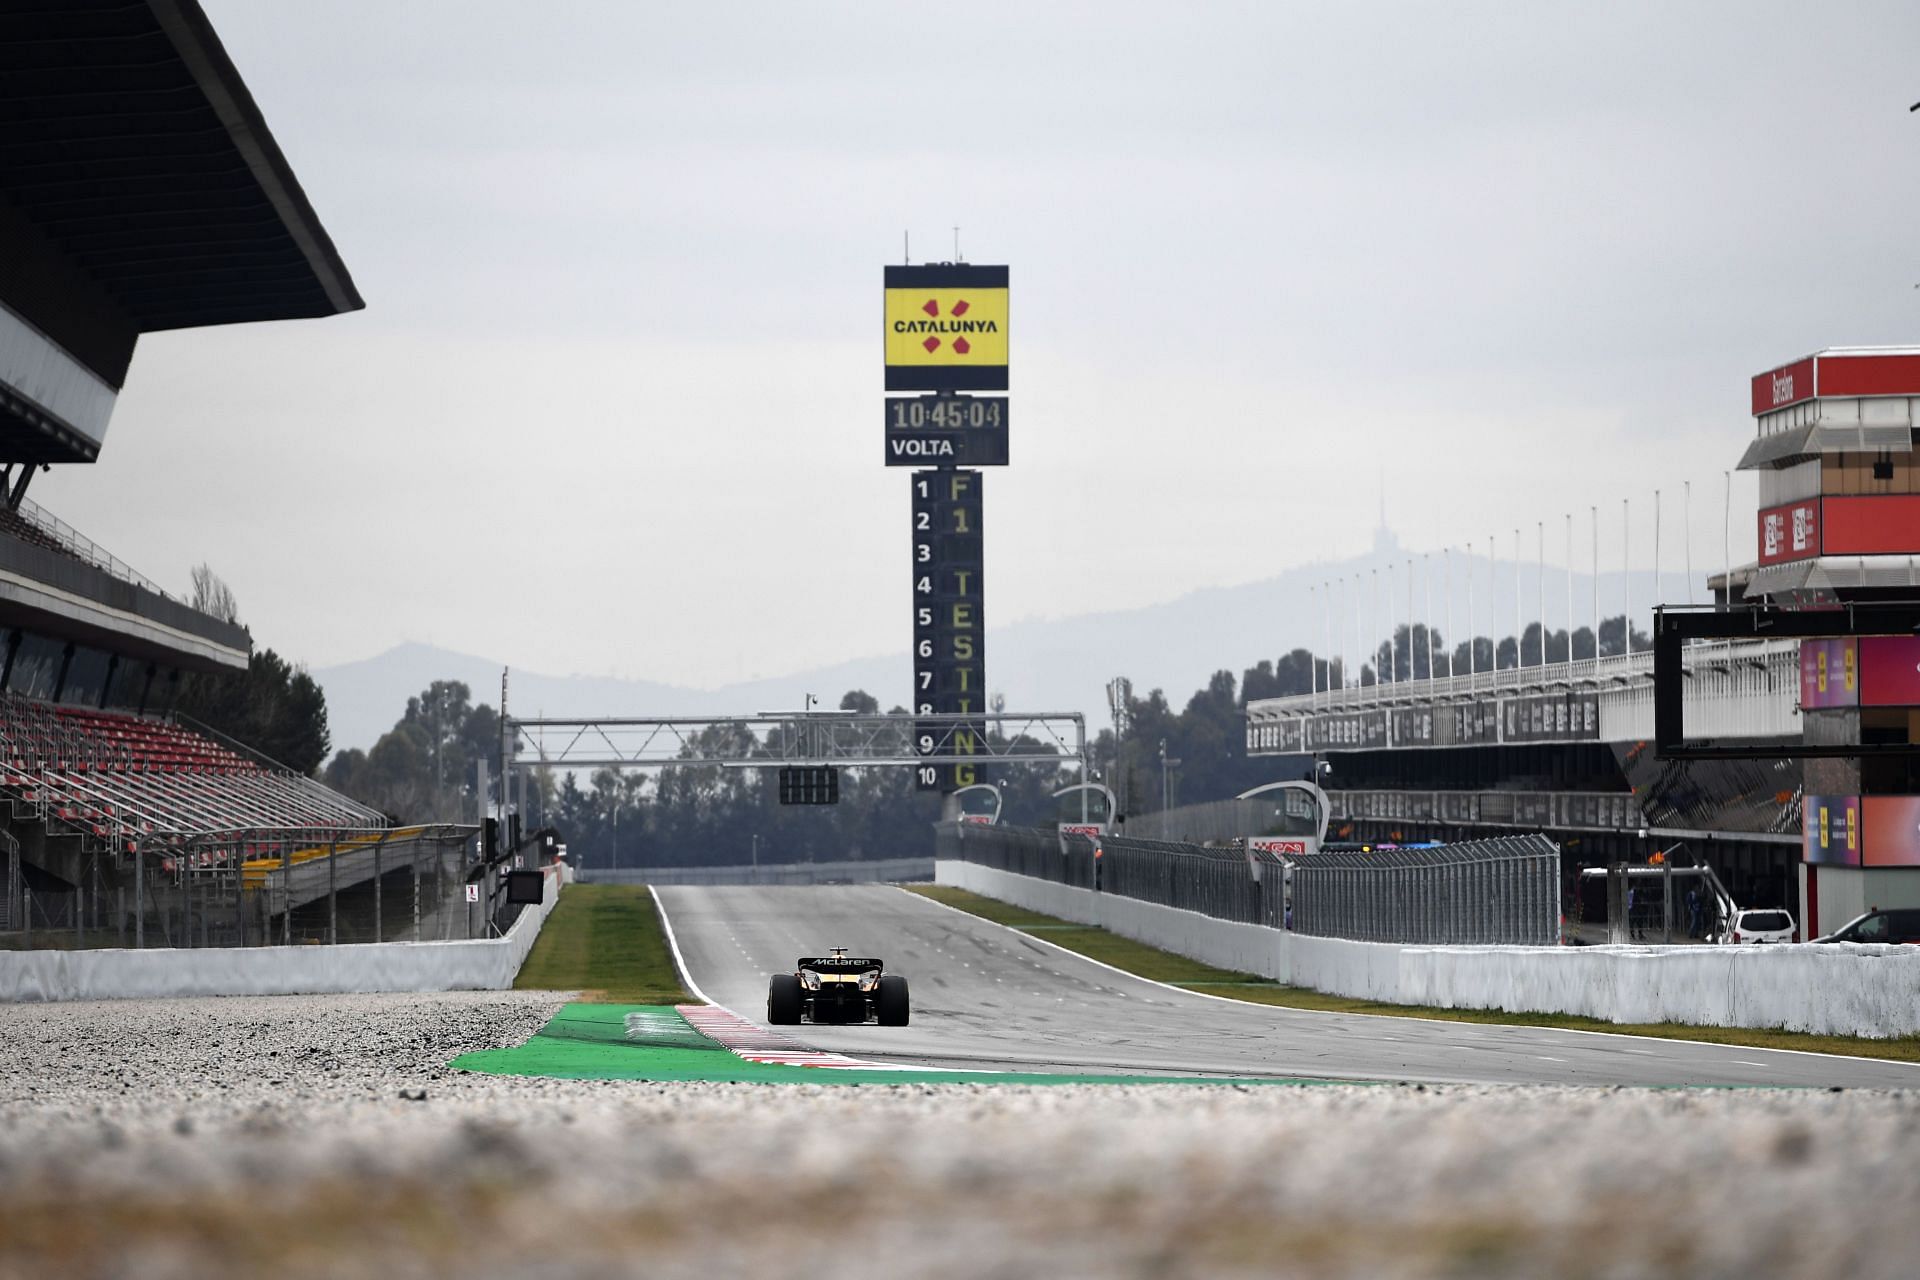 A general view of the Circuit de Barcelona-Catalunya (Photo by Rudy Carezzevoli/Getty Images)